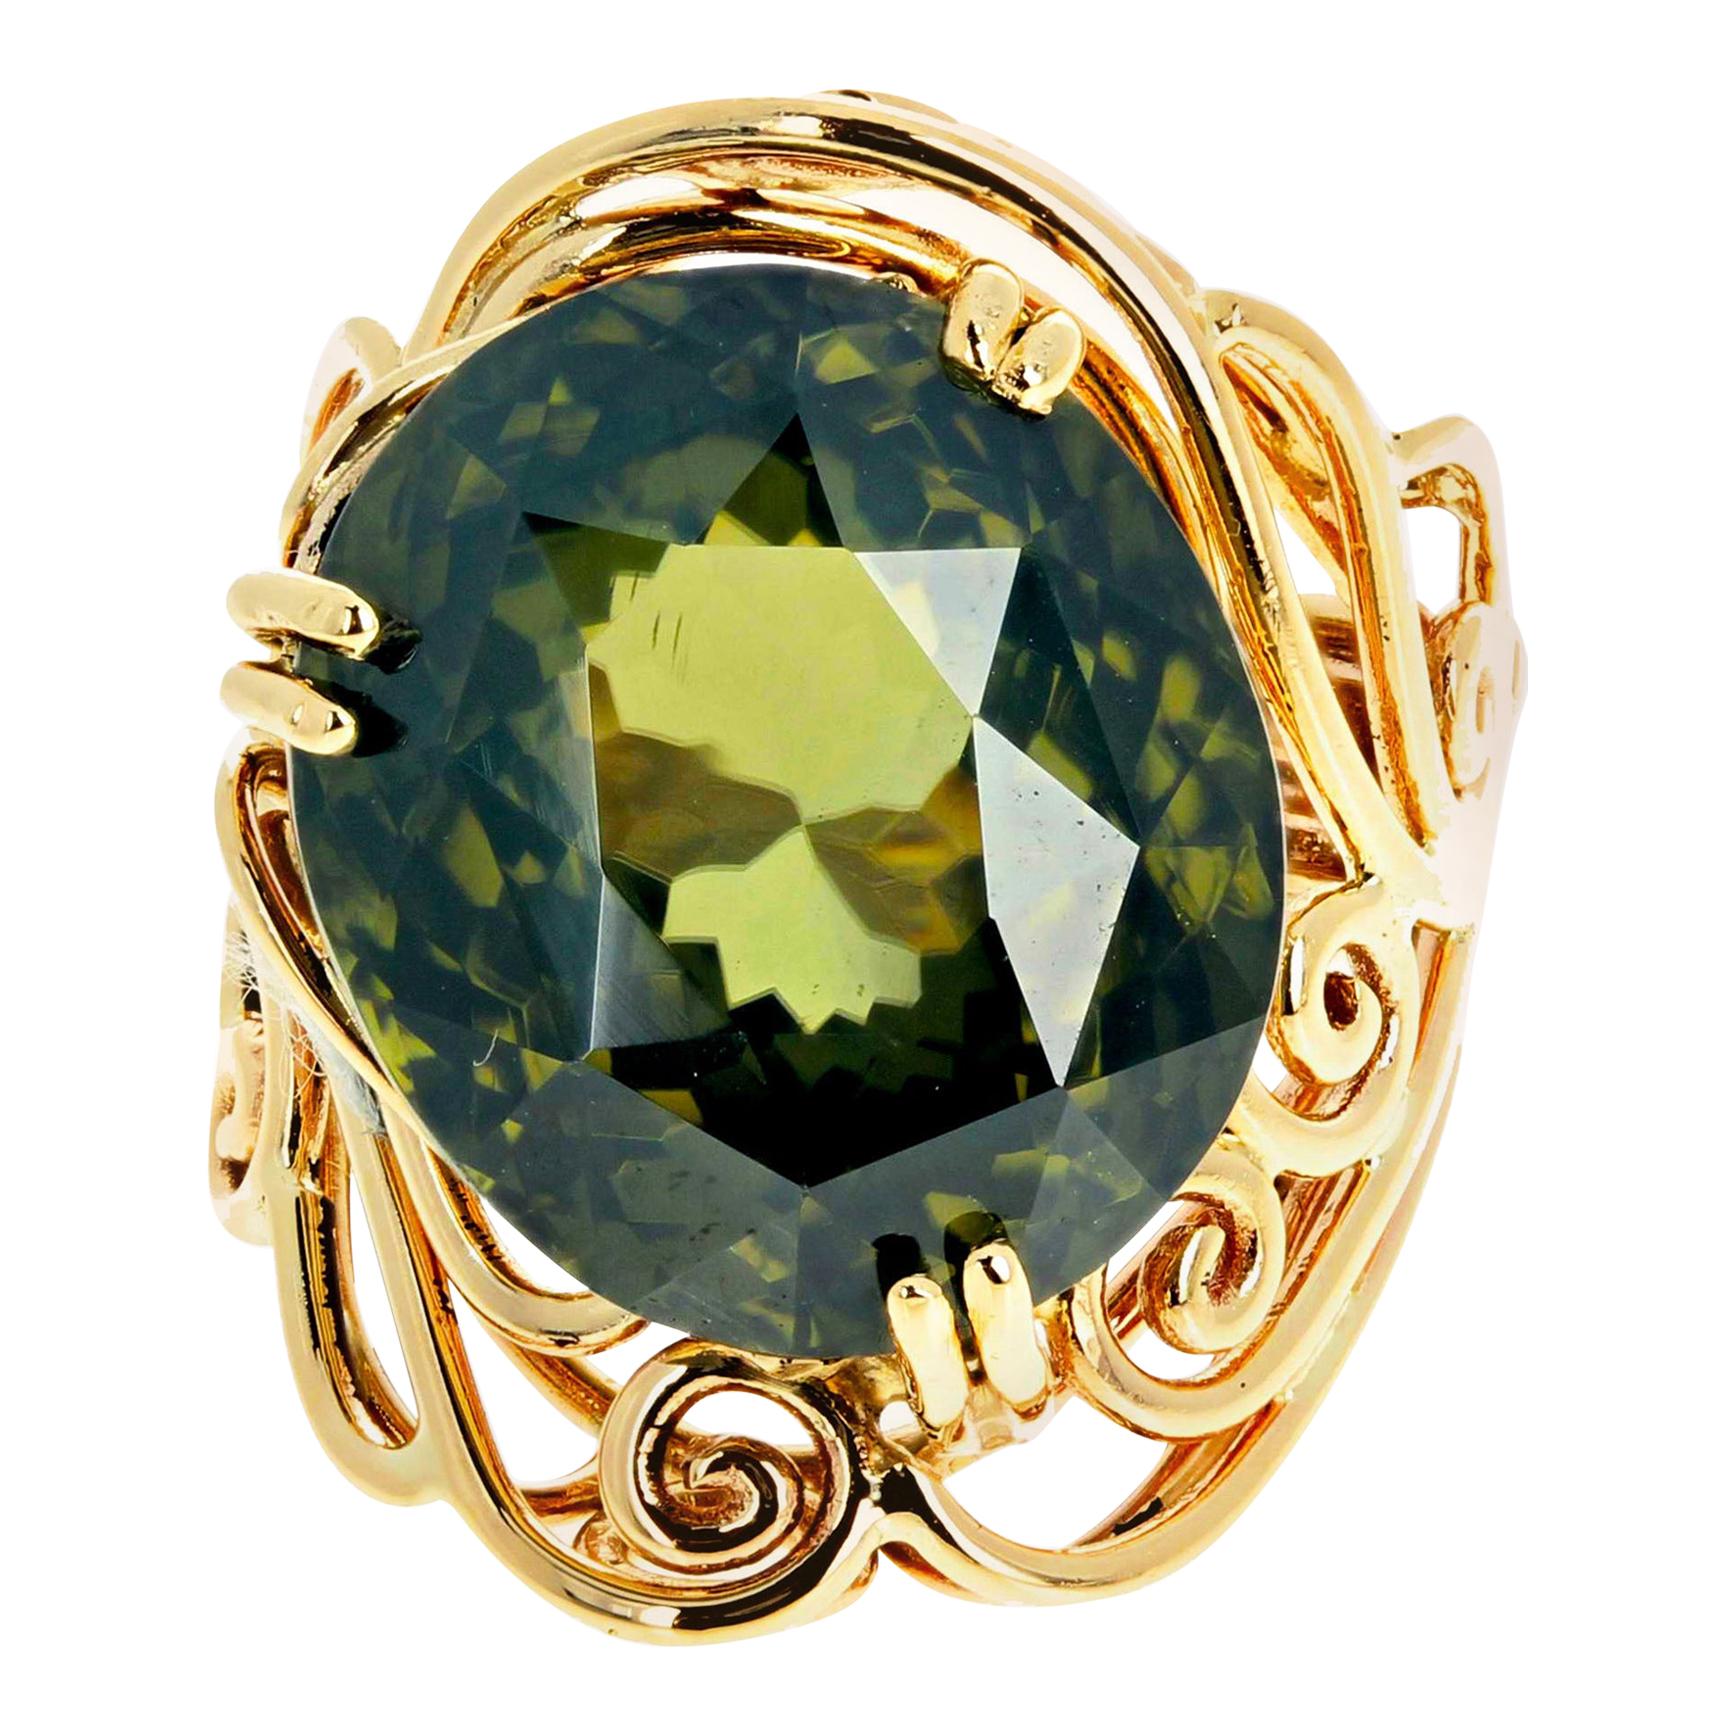 AJD Rare ENORMOUS Gemstone 19.4 Ct Natural Green Zircon Yellow Gold Ring